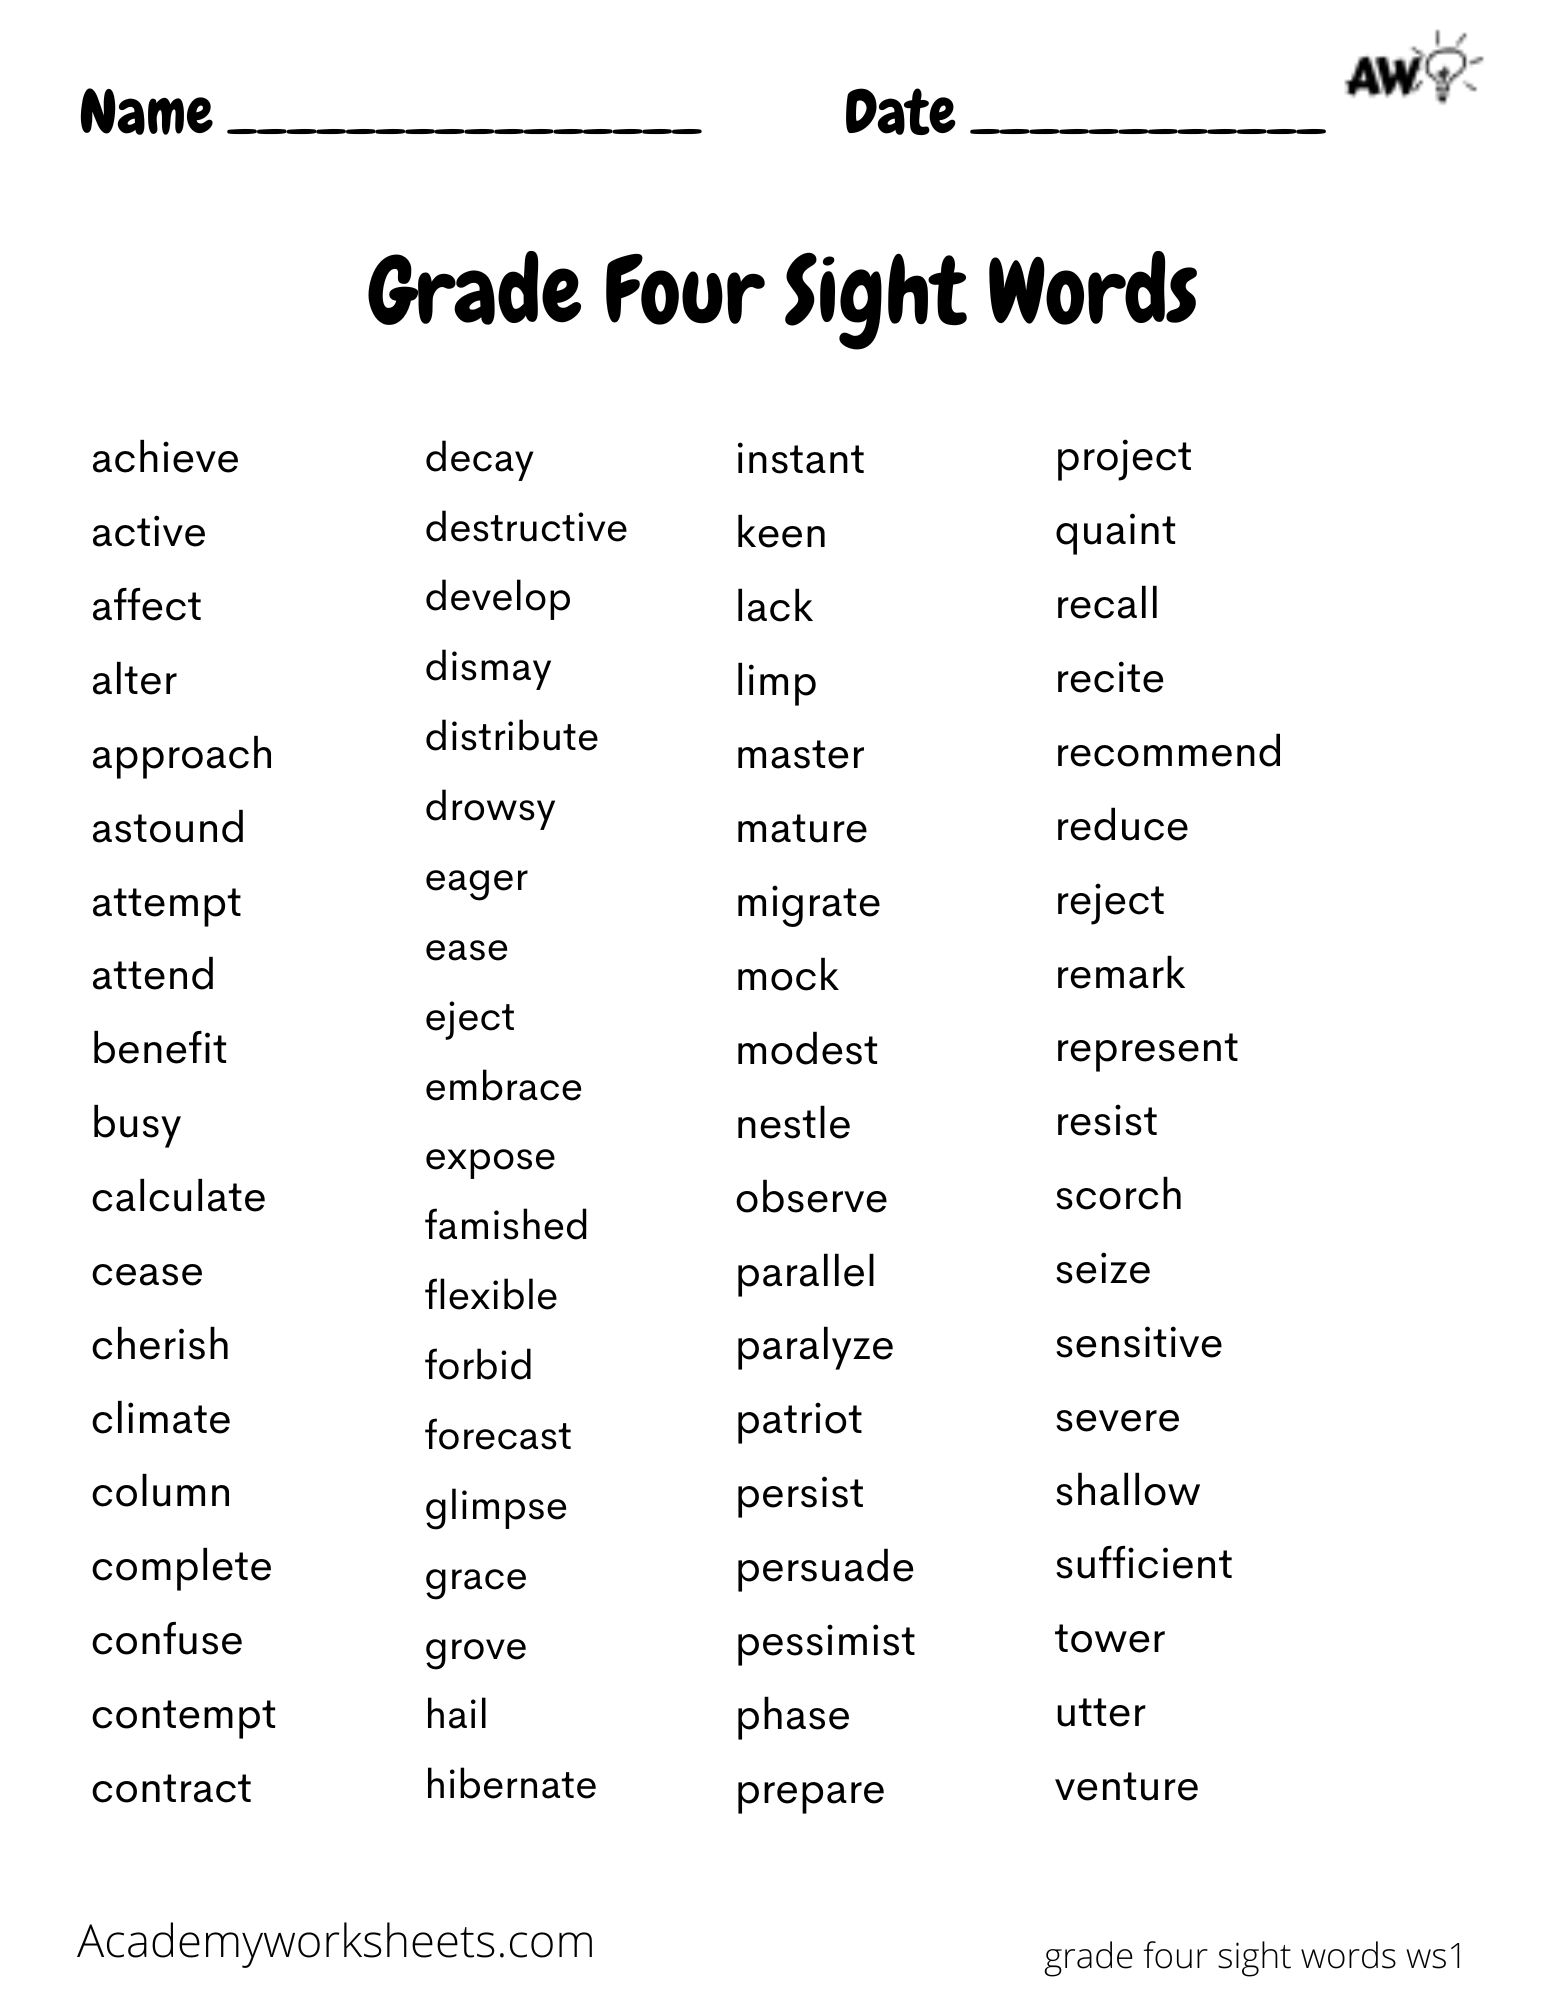 4th-grade-archives-academy-worksheets